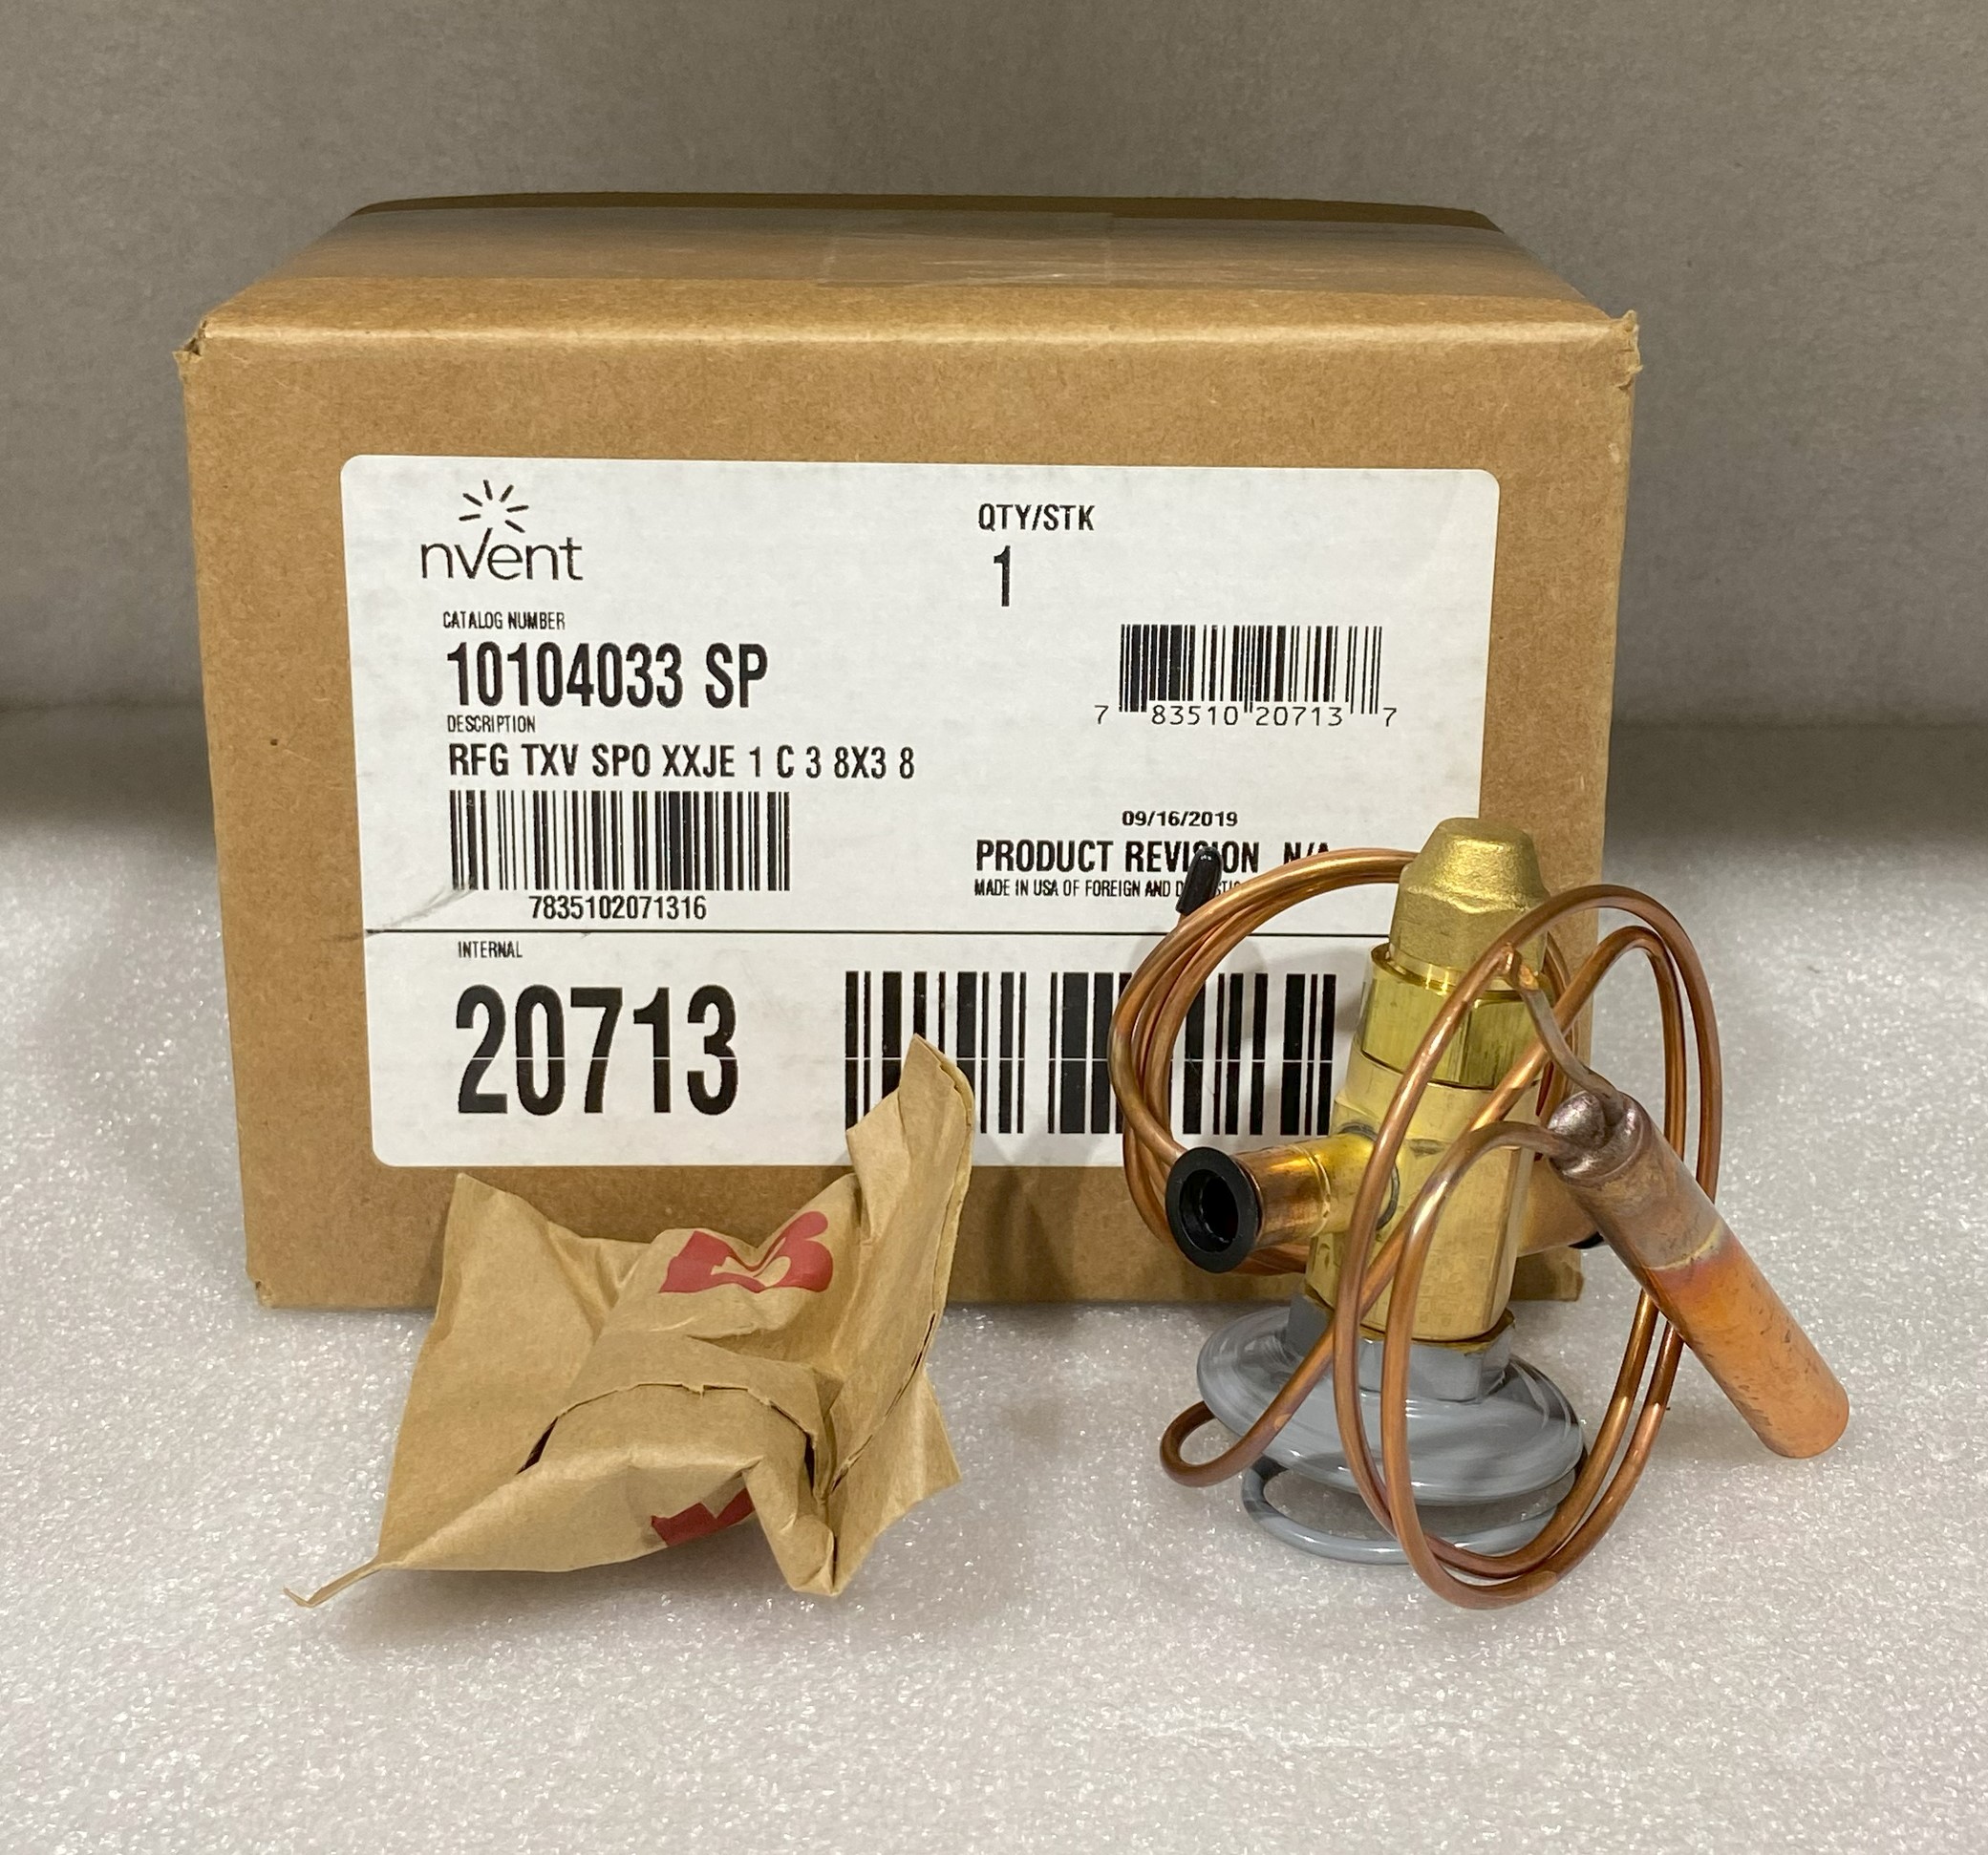 nVent 10104033SP Thermal Expansion Valve